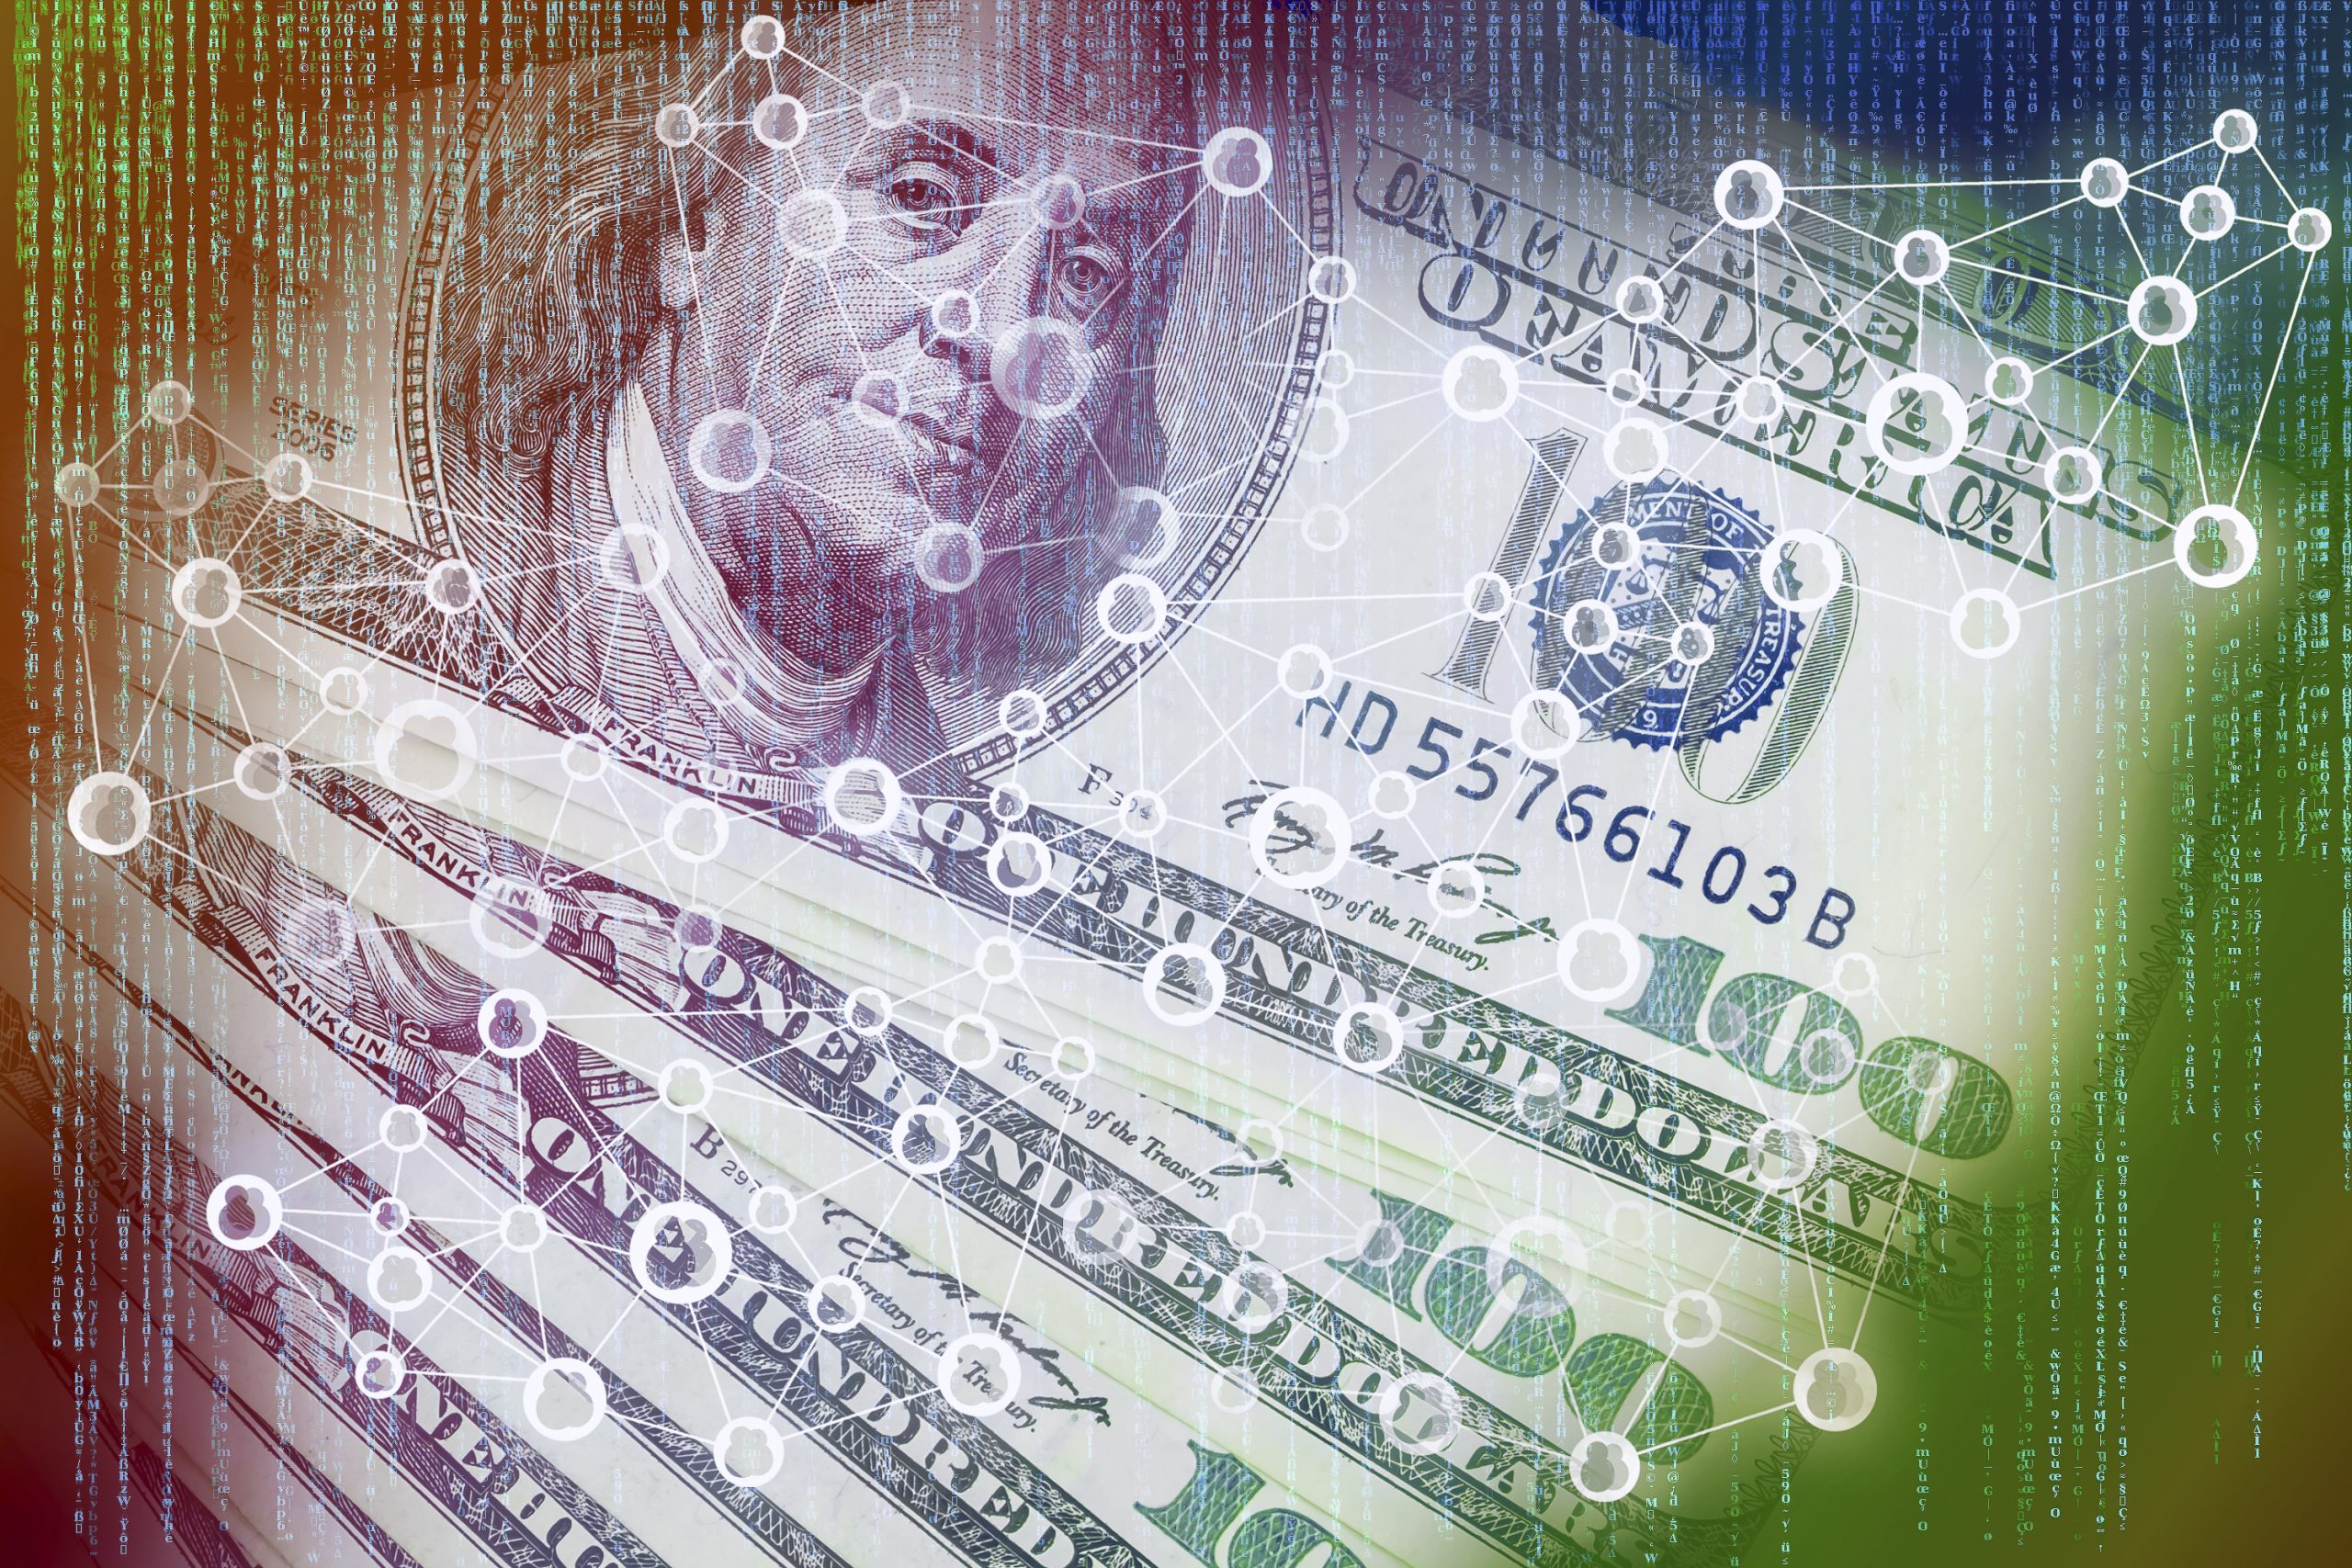 Cyptocurrency,Or,Digital,Money,Concept,Image.,Double,Exposure,Of,Us